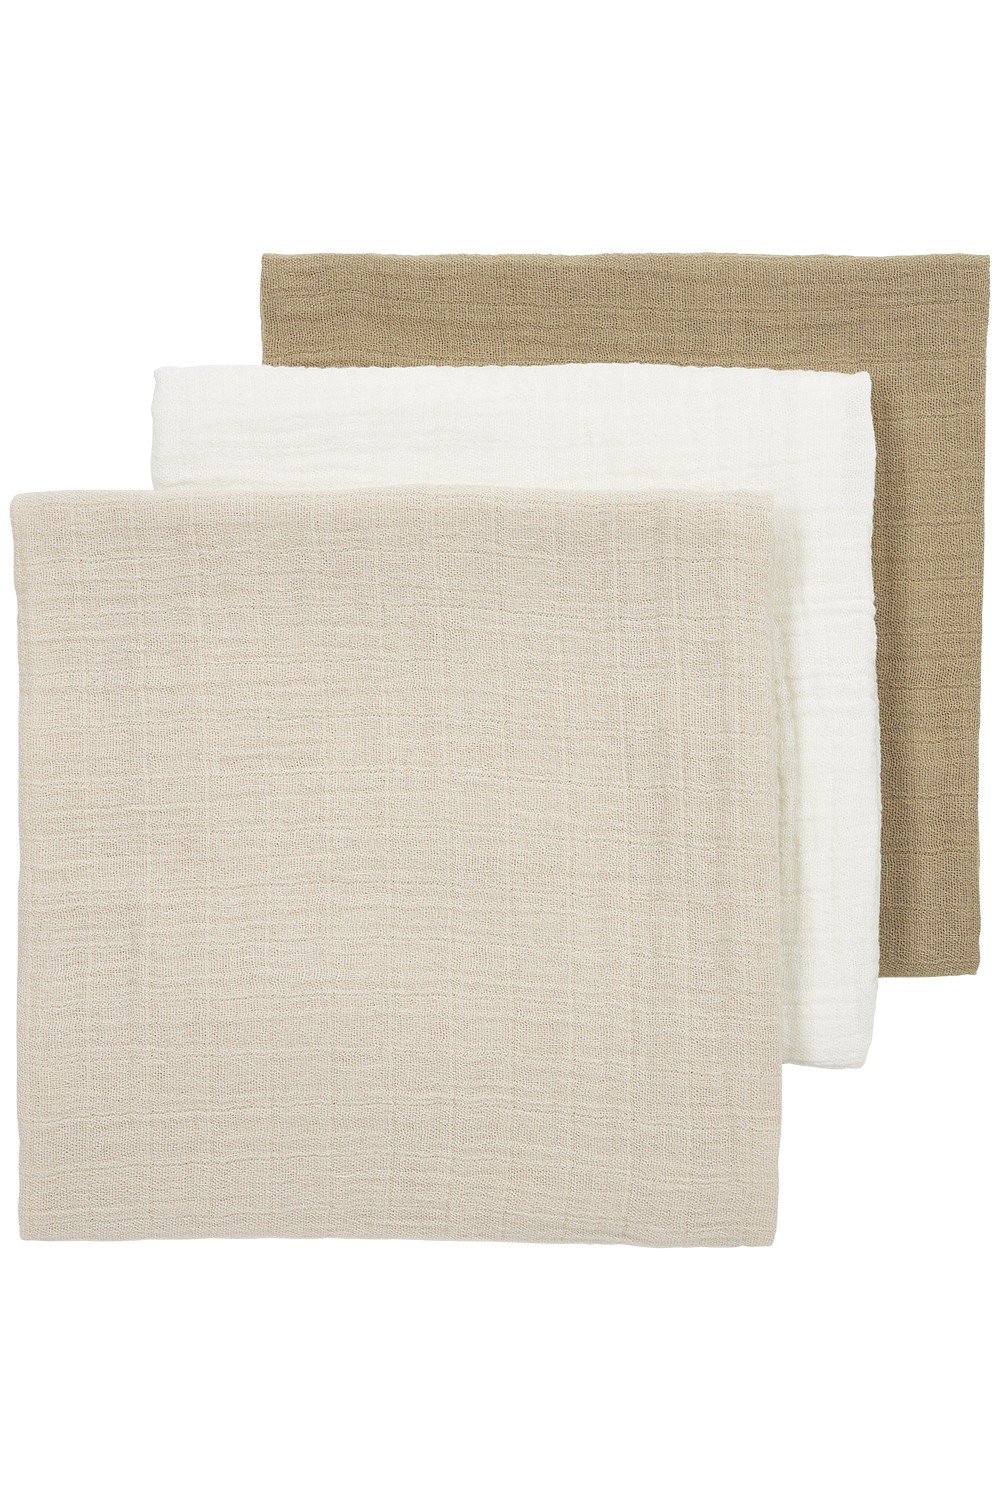 Pre-washed hydrofiele doeken 3-pack Uni - offwhite/soft sand/taupe - 70x70cm